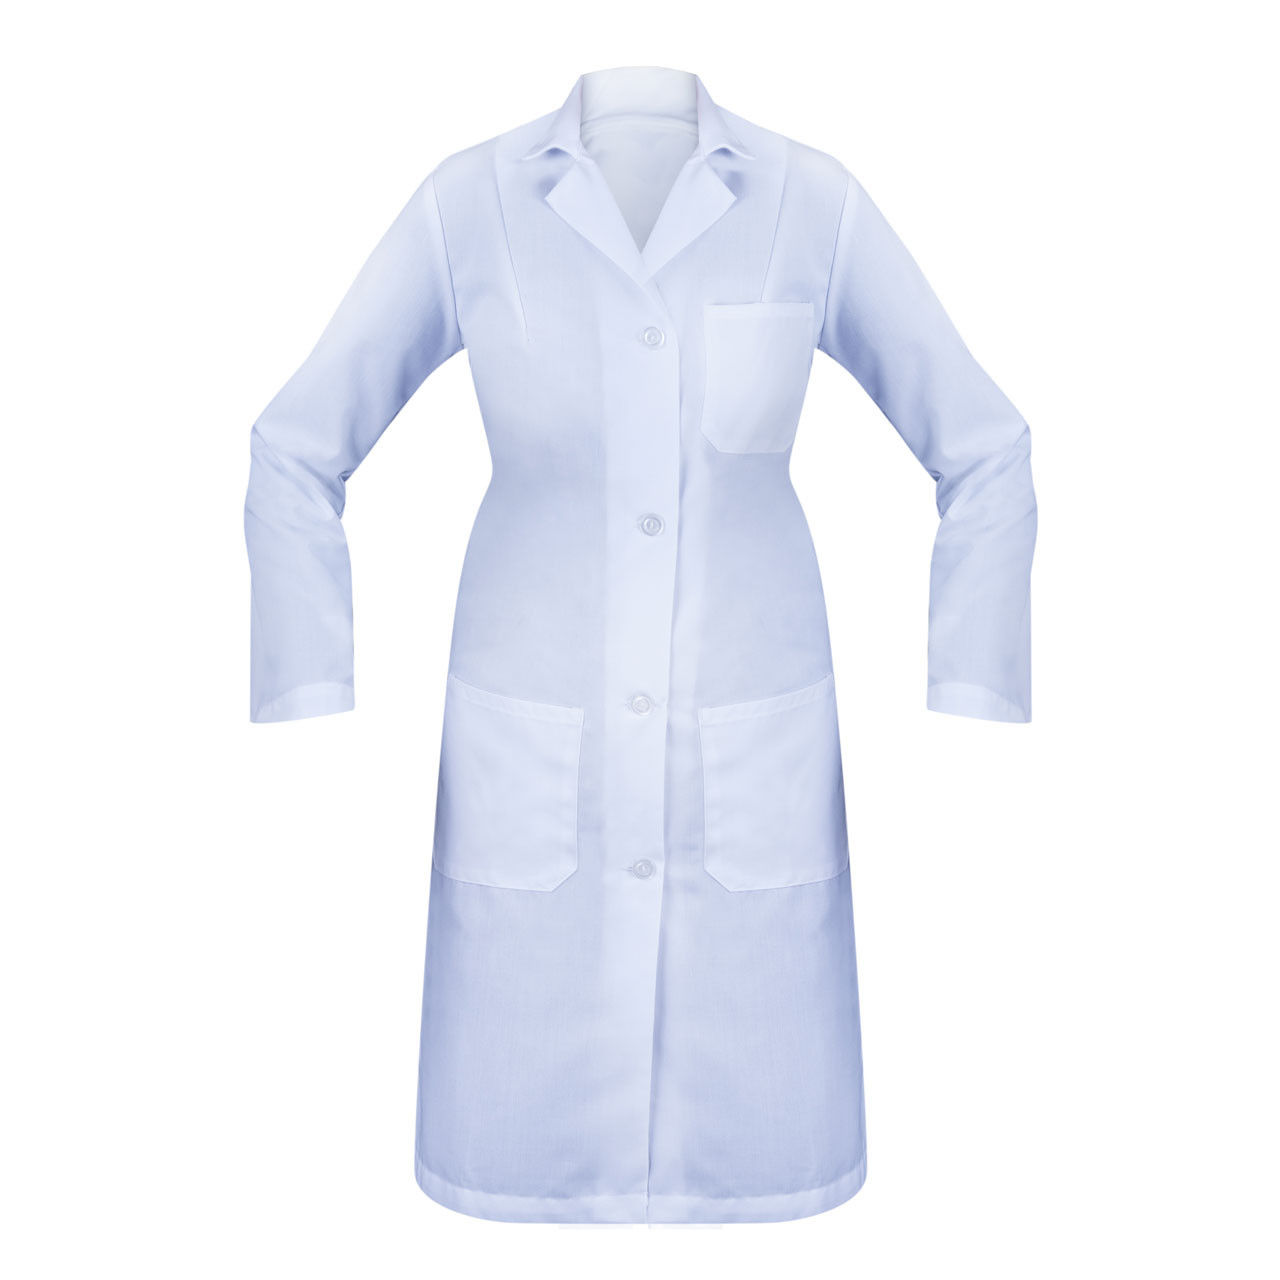 What color is the Female Lab Coat?